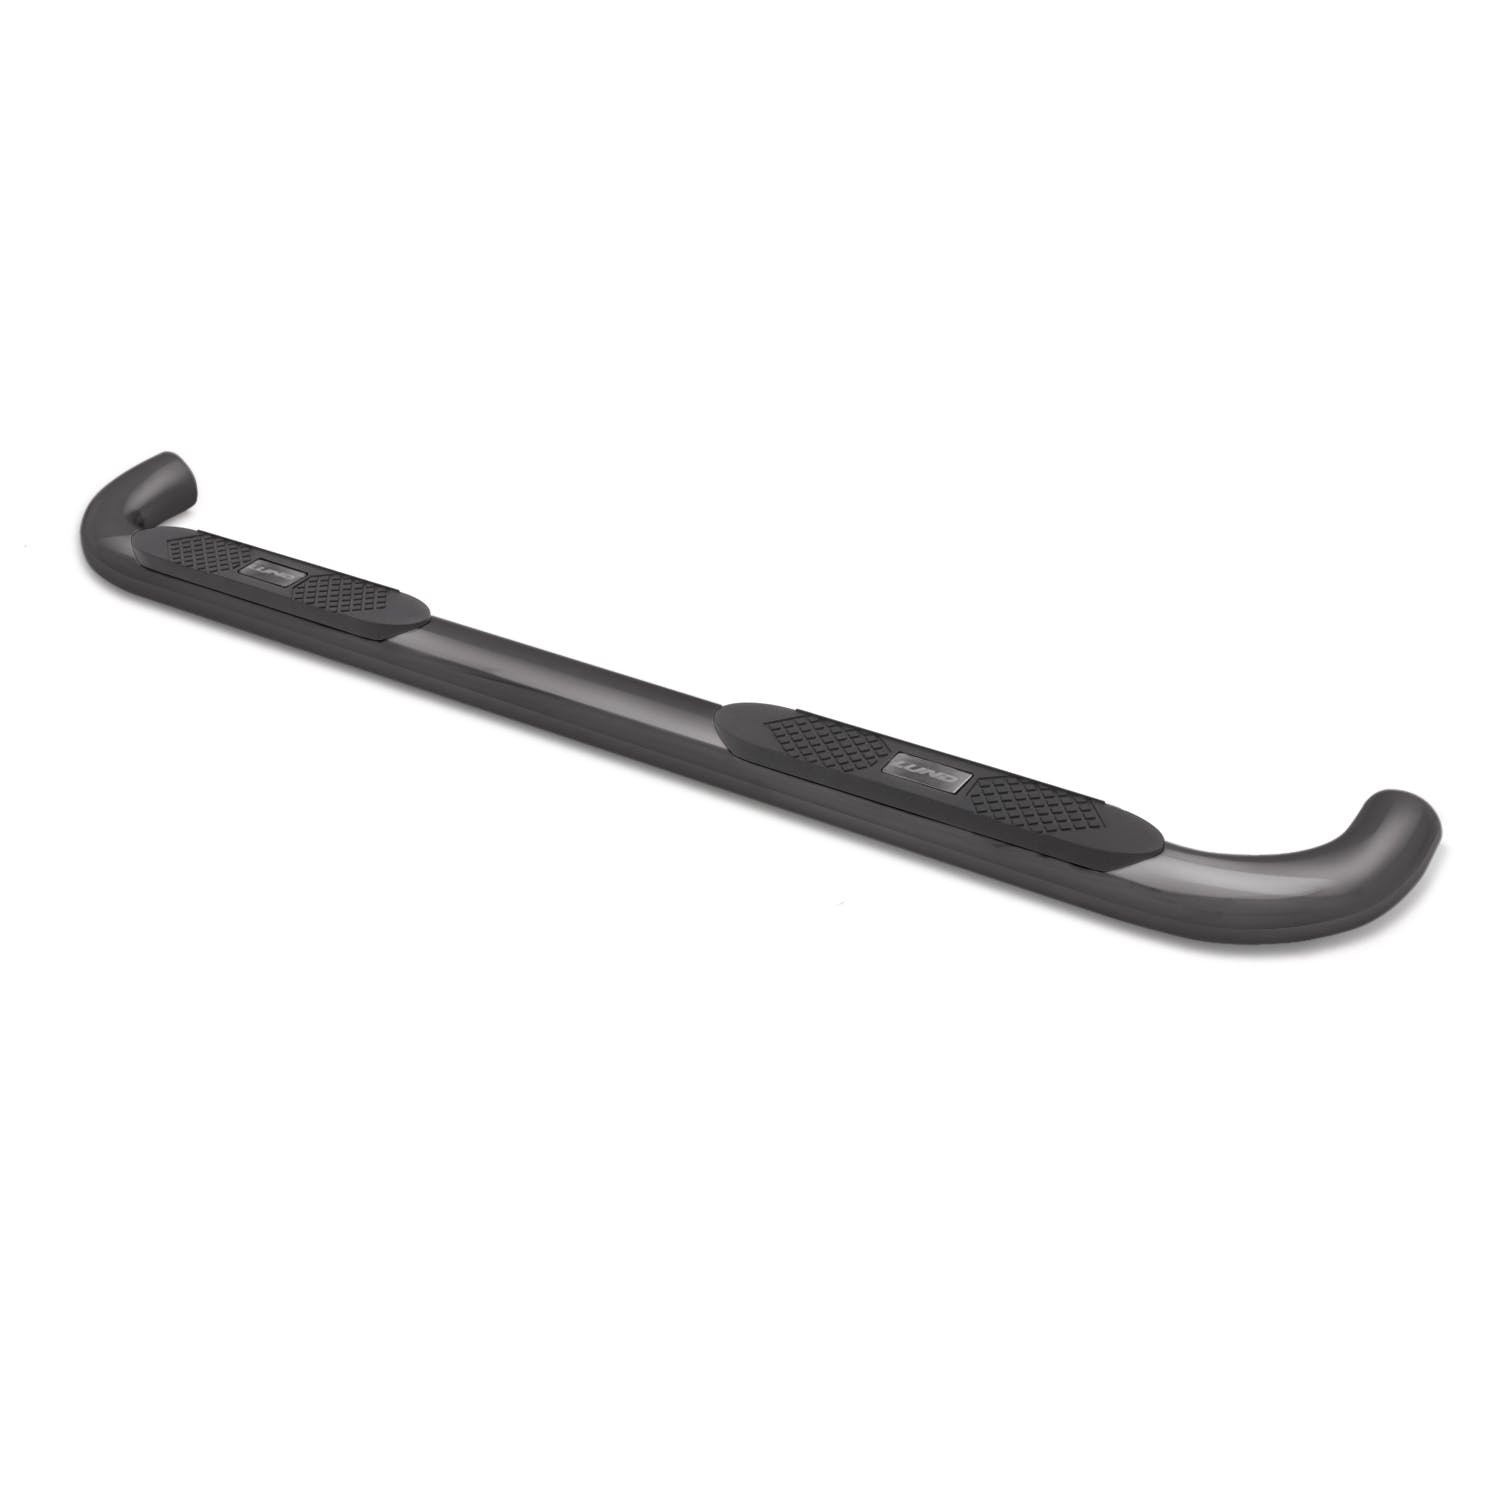 LUND 23475771 4 Inch Oval Curved Nerf Bar - Black 4 In OVAL CURVED STEEL